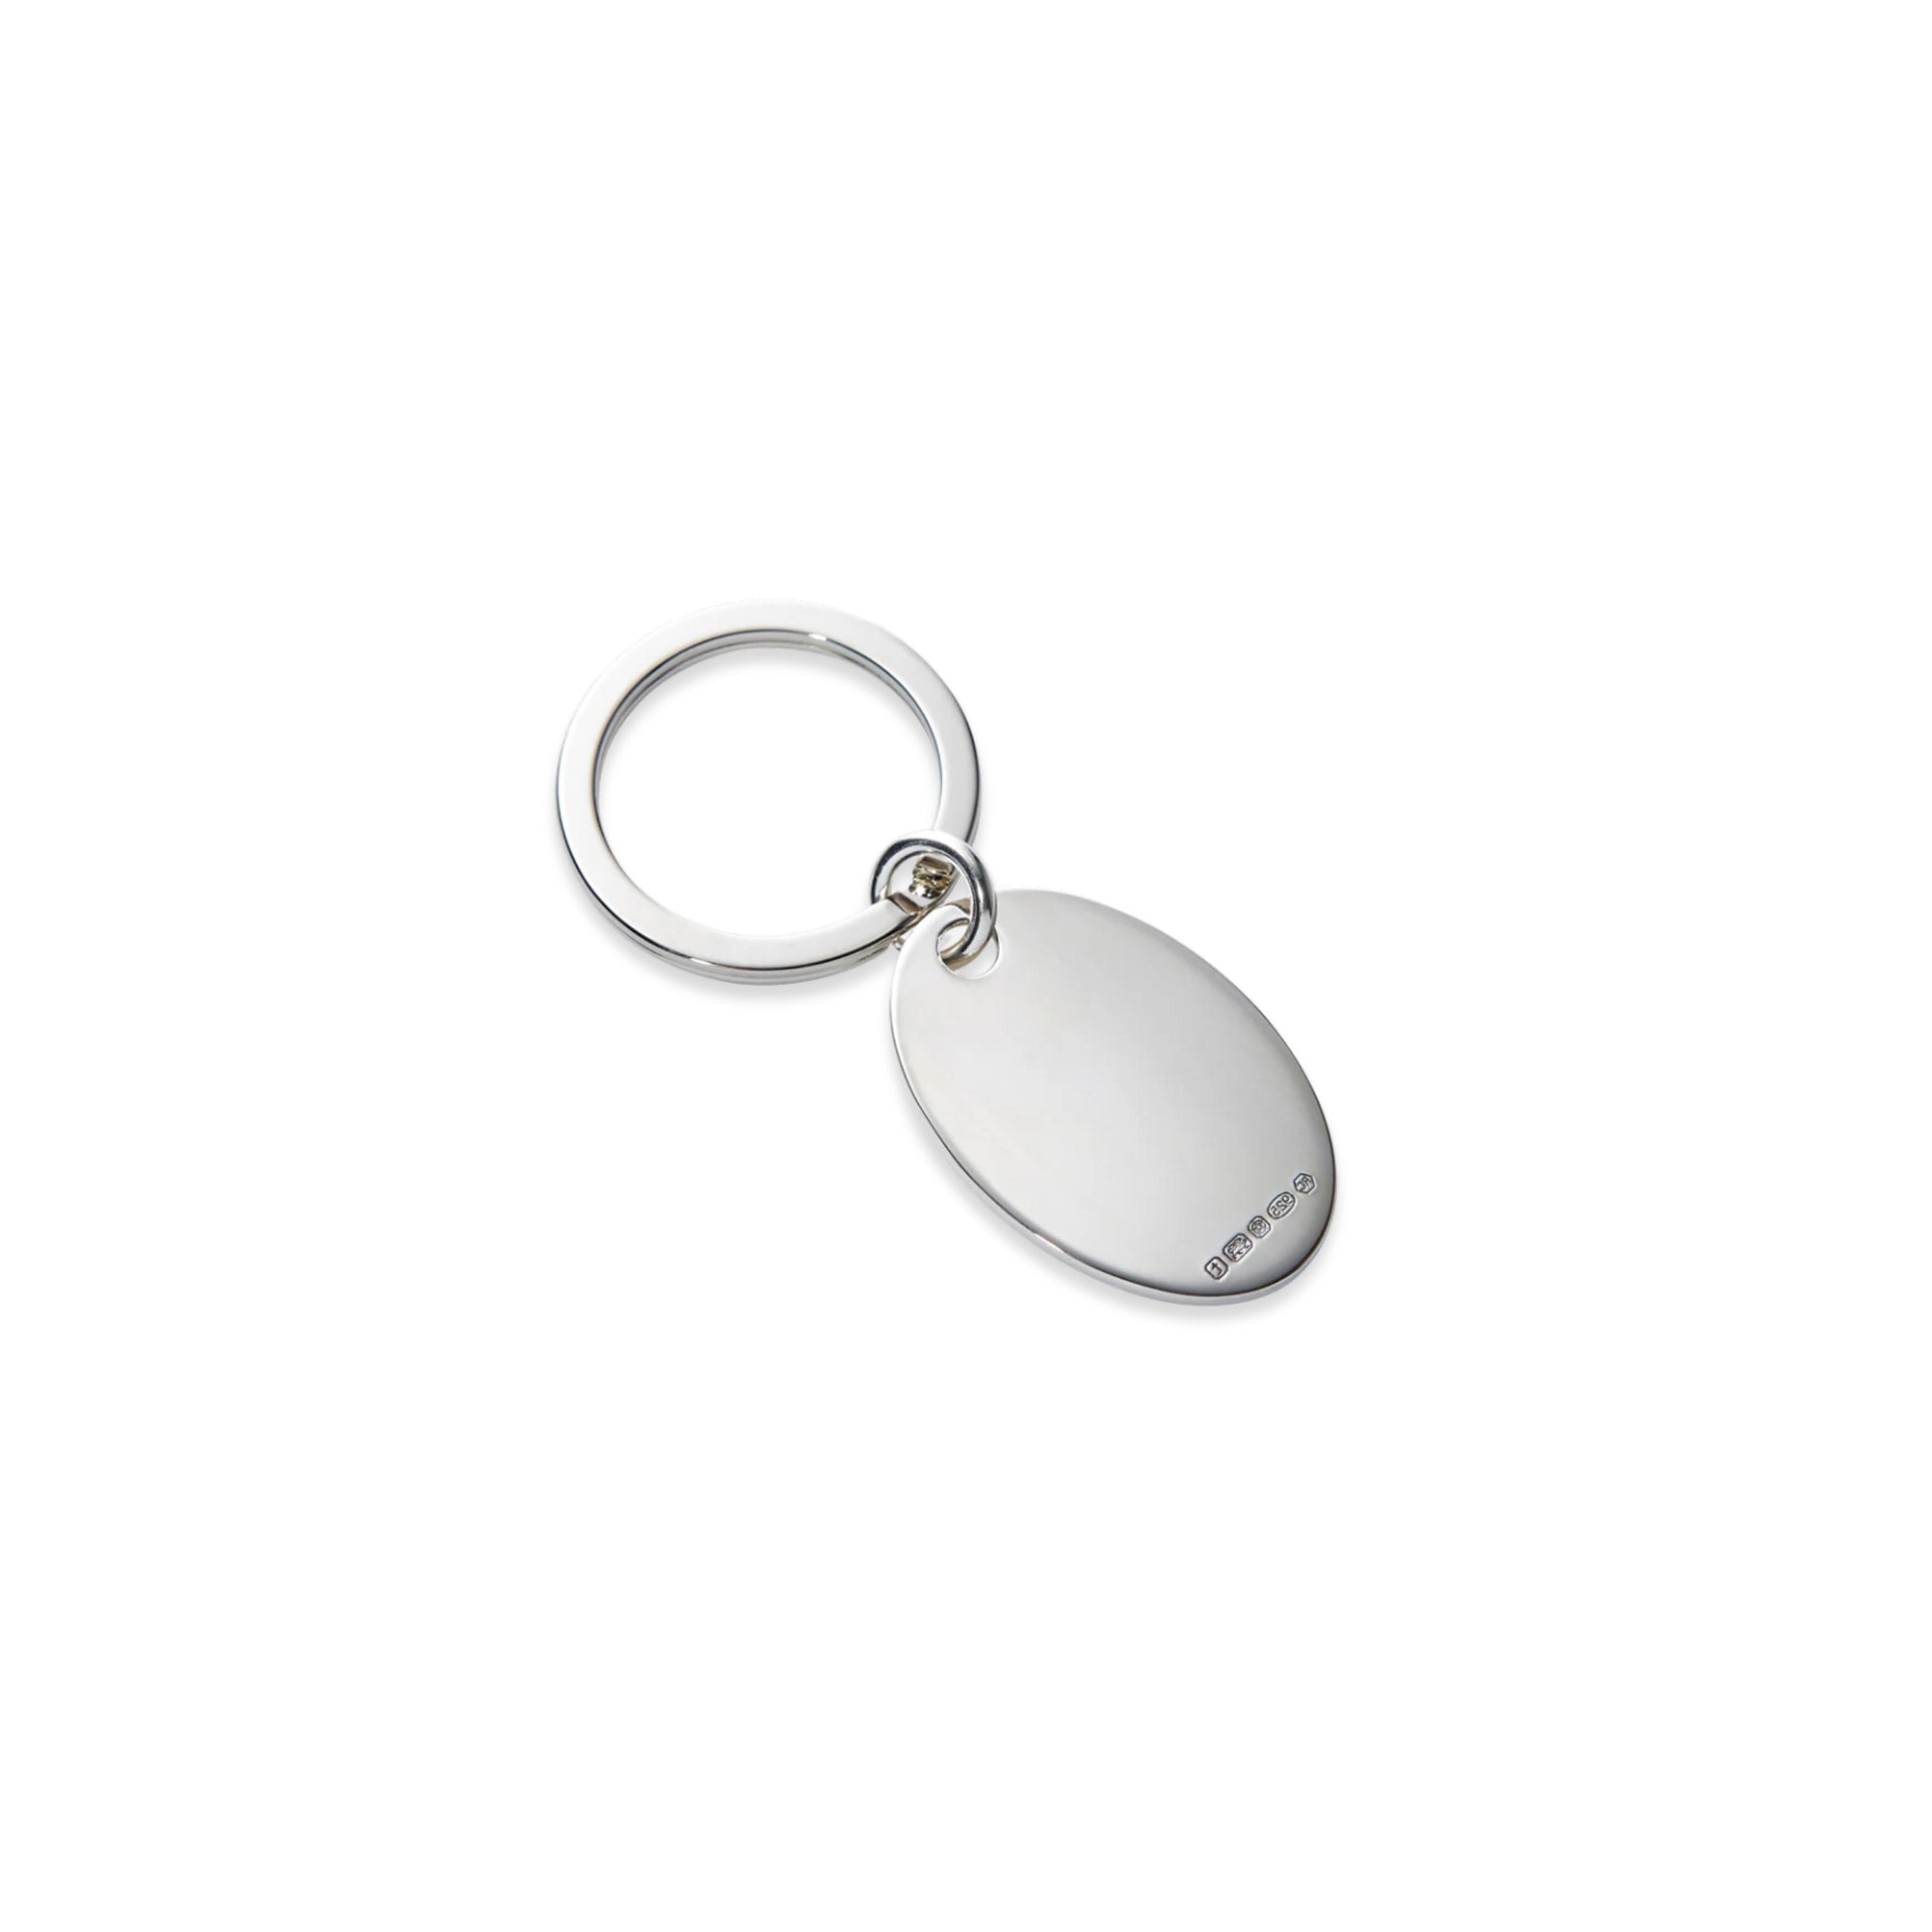 Carrs Silver Oval Sterling Silver Key Fob